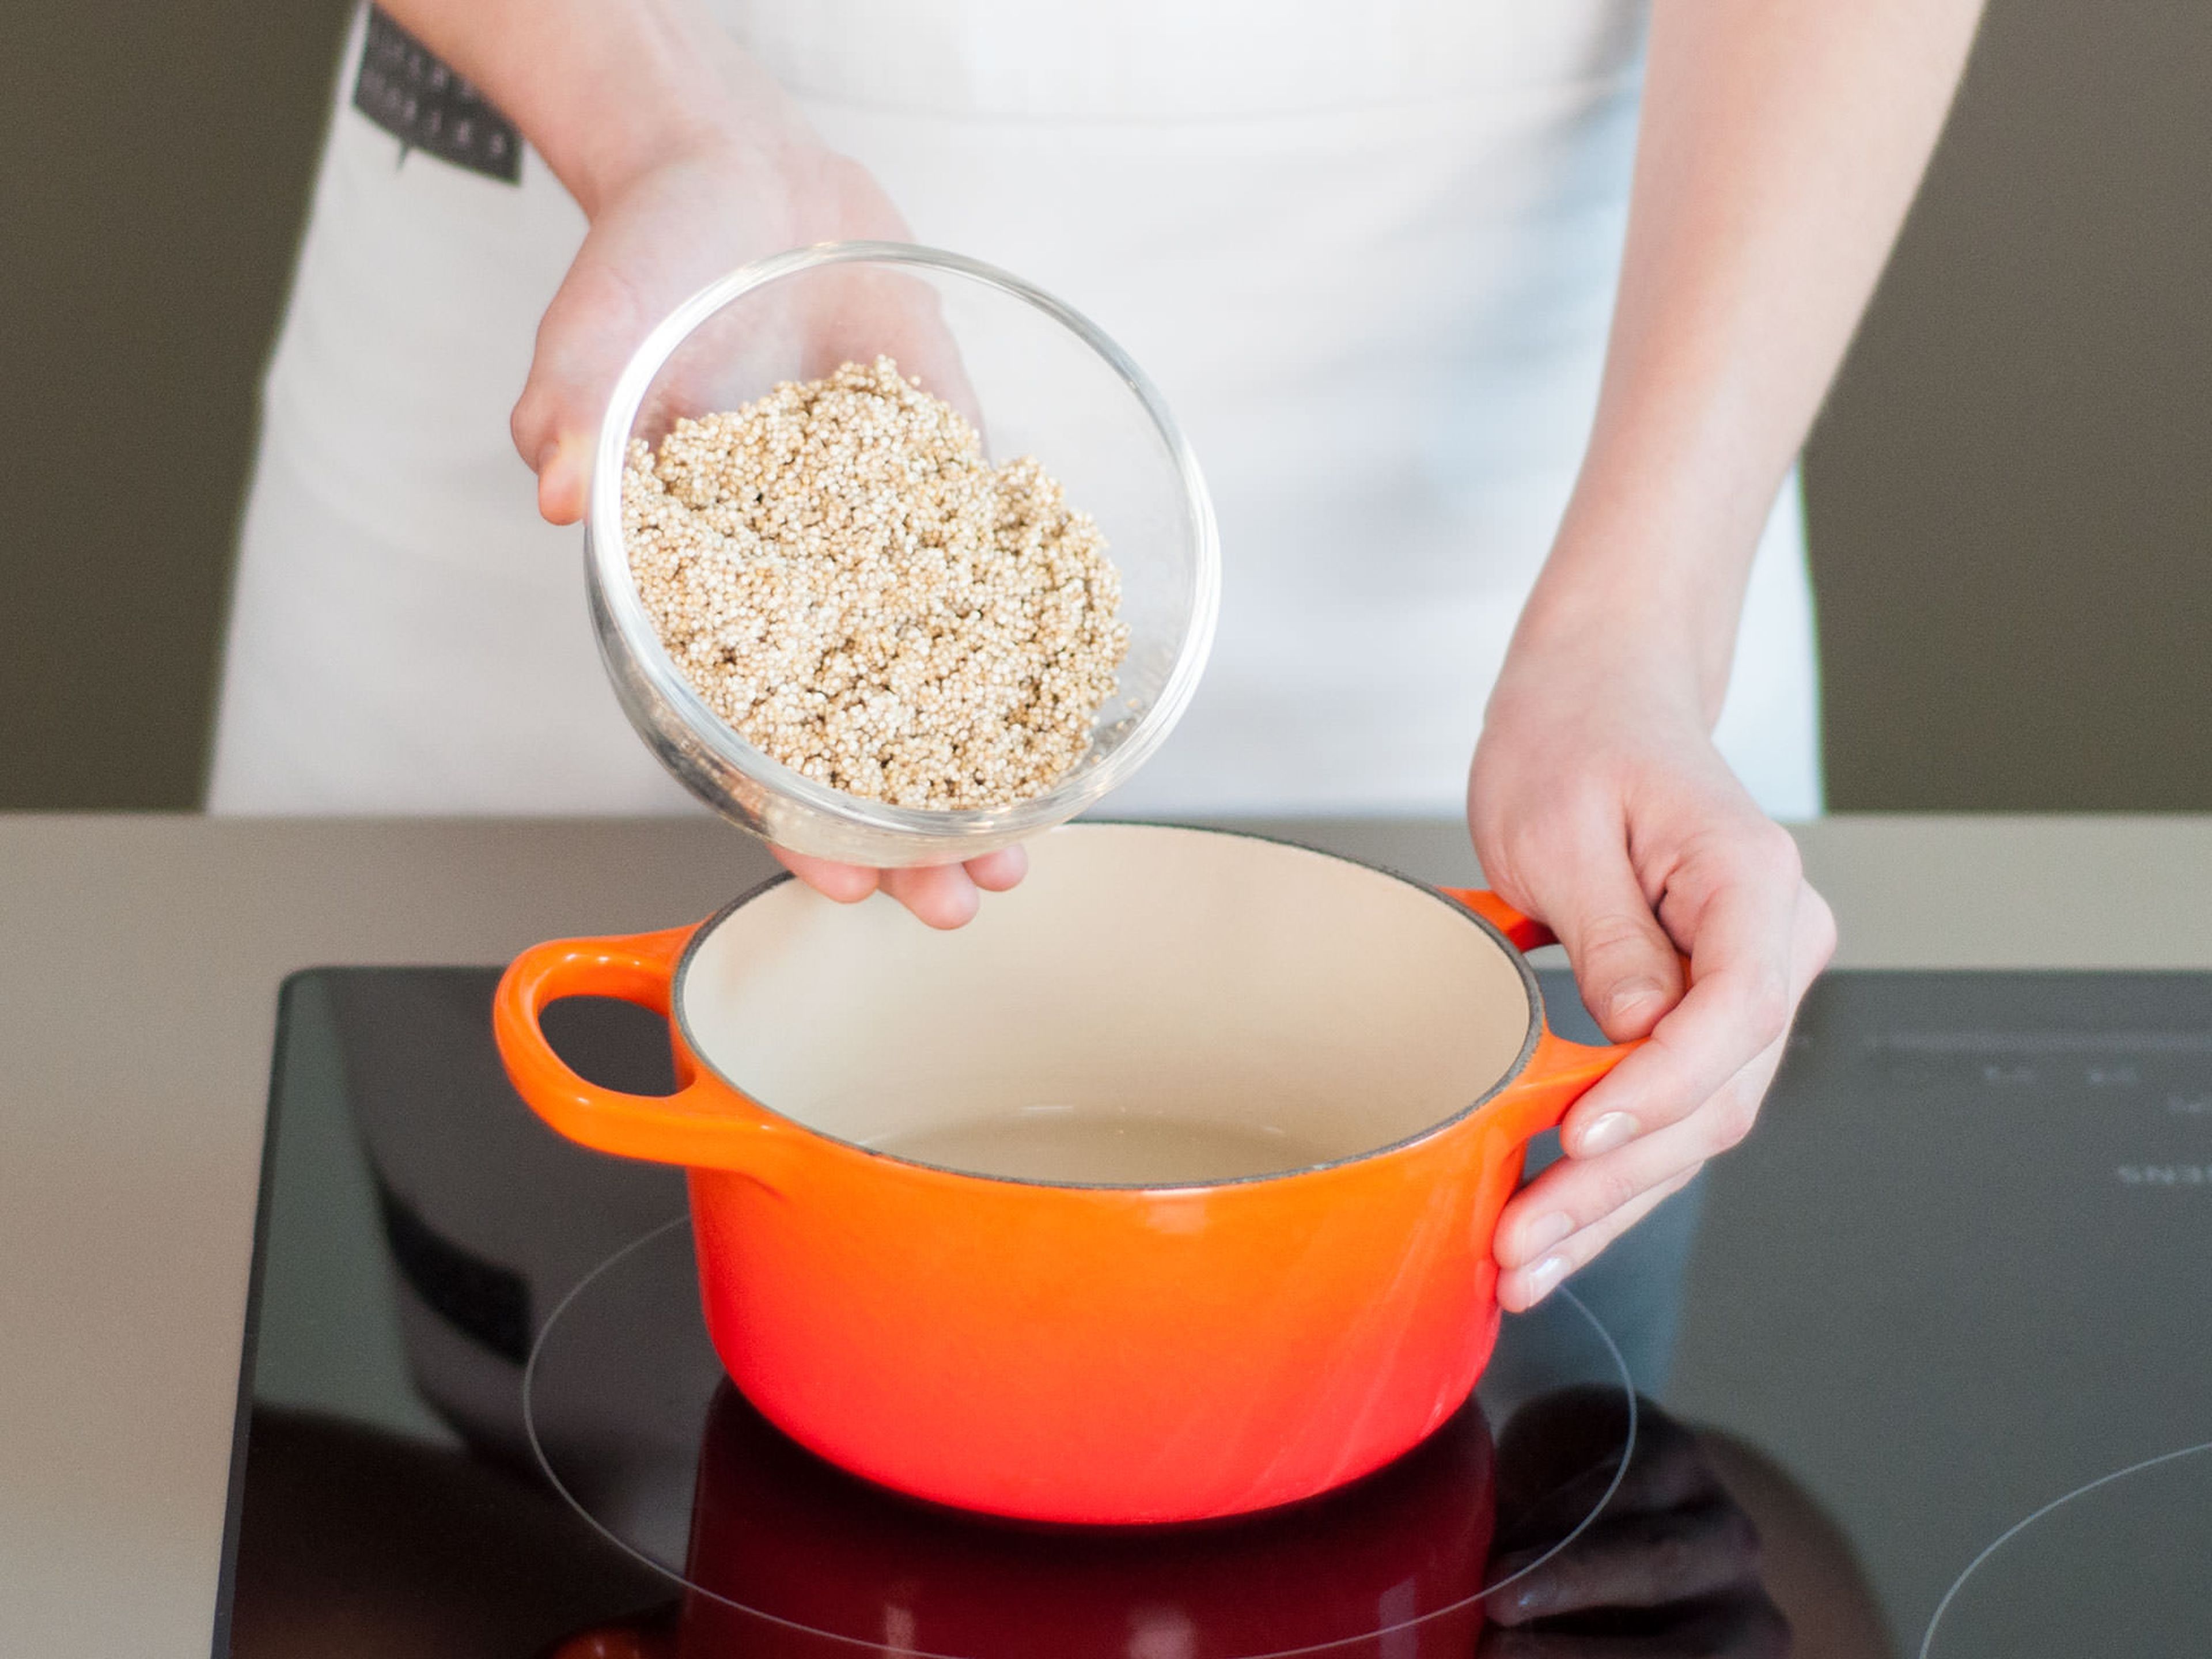 Rinse quinoa under water and add to saucepan with salted water. Bring to a boil. Then, cover and reduce heat to low. Cook for  approx. 15 min. until tender. Remove from heat and let stand, covered, for  approx. 5 min.